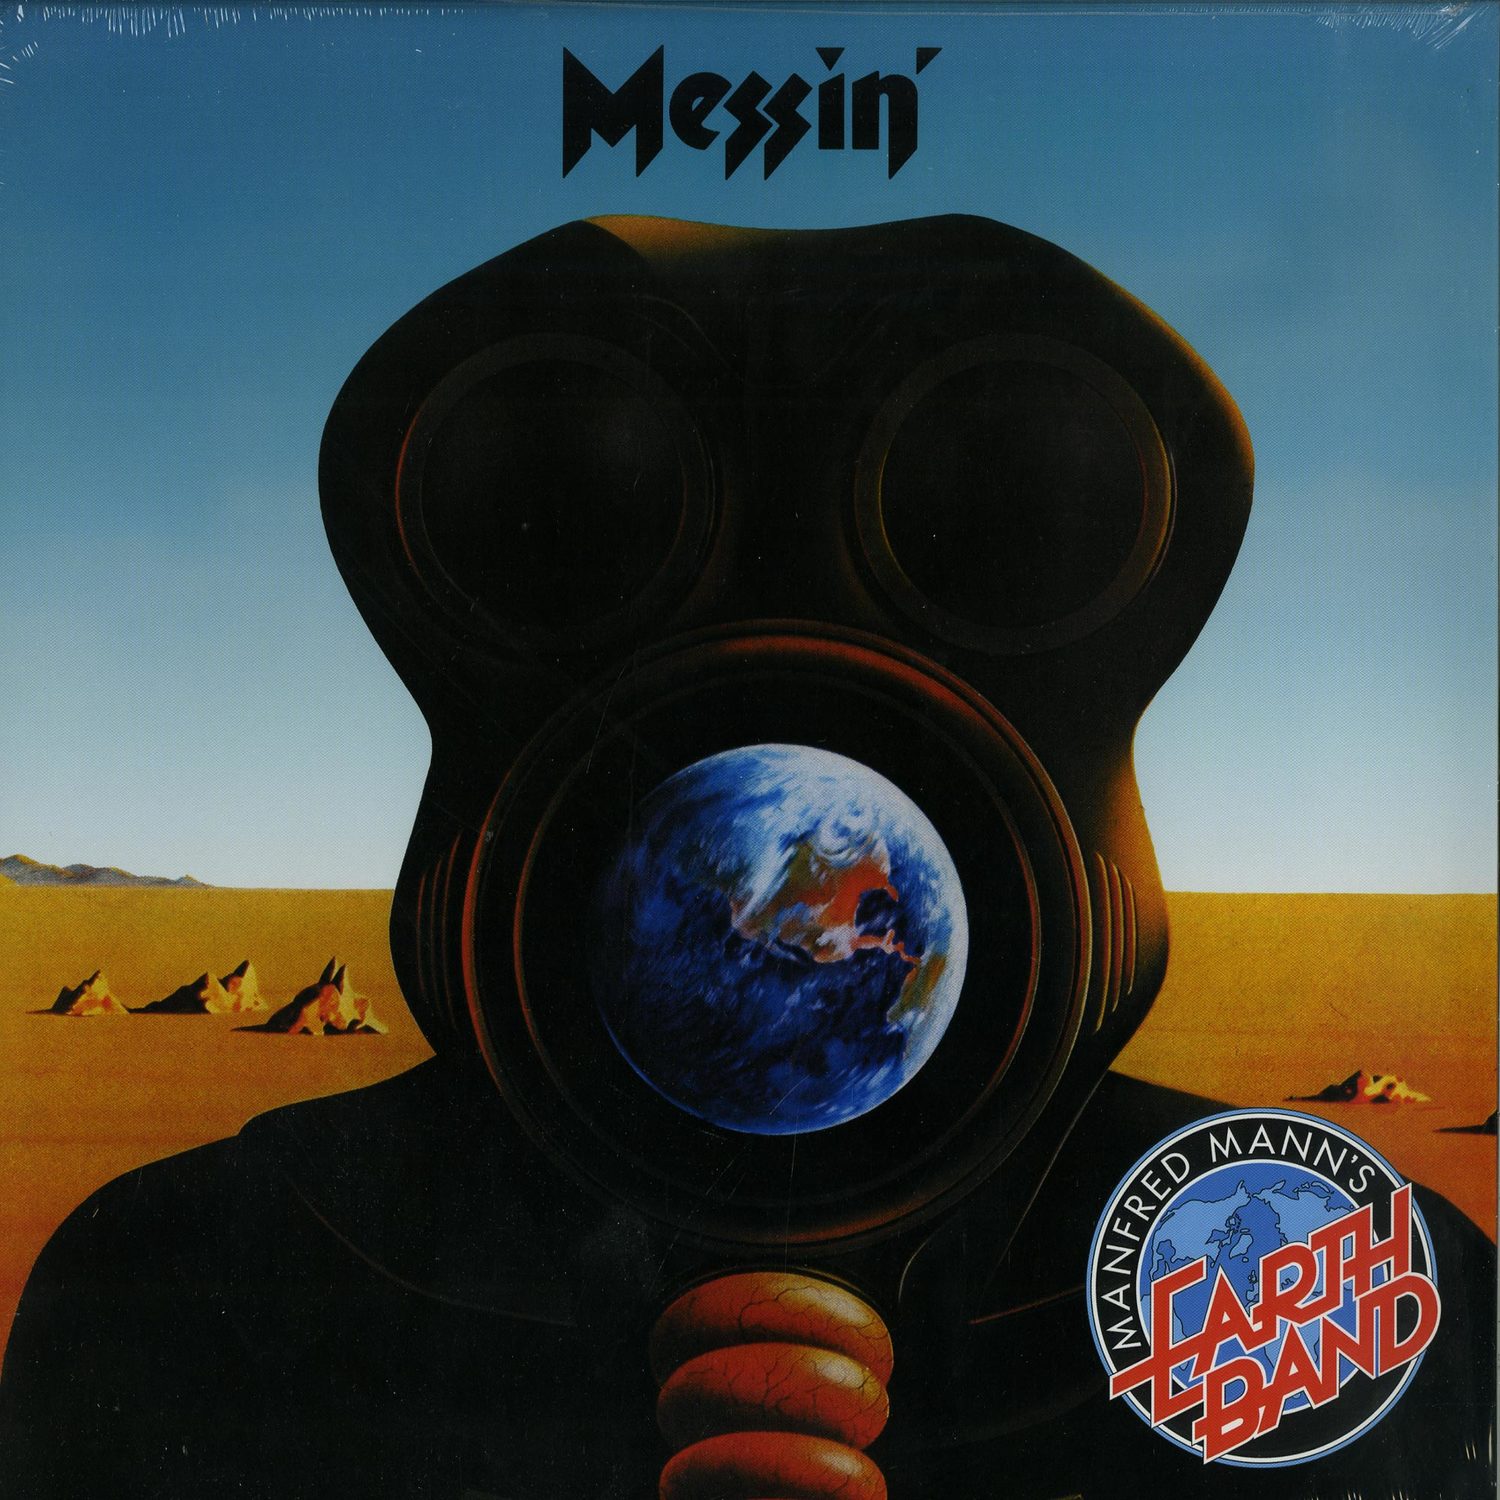 Manfred Manns Earthband - MESSIN 